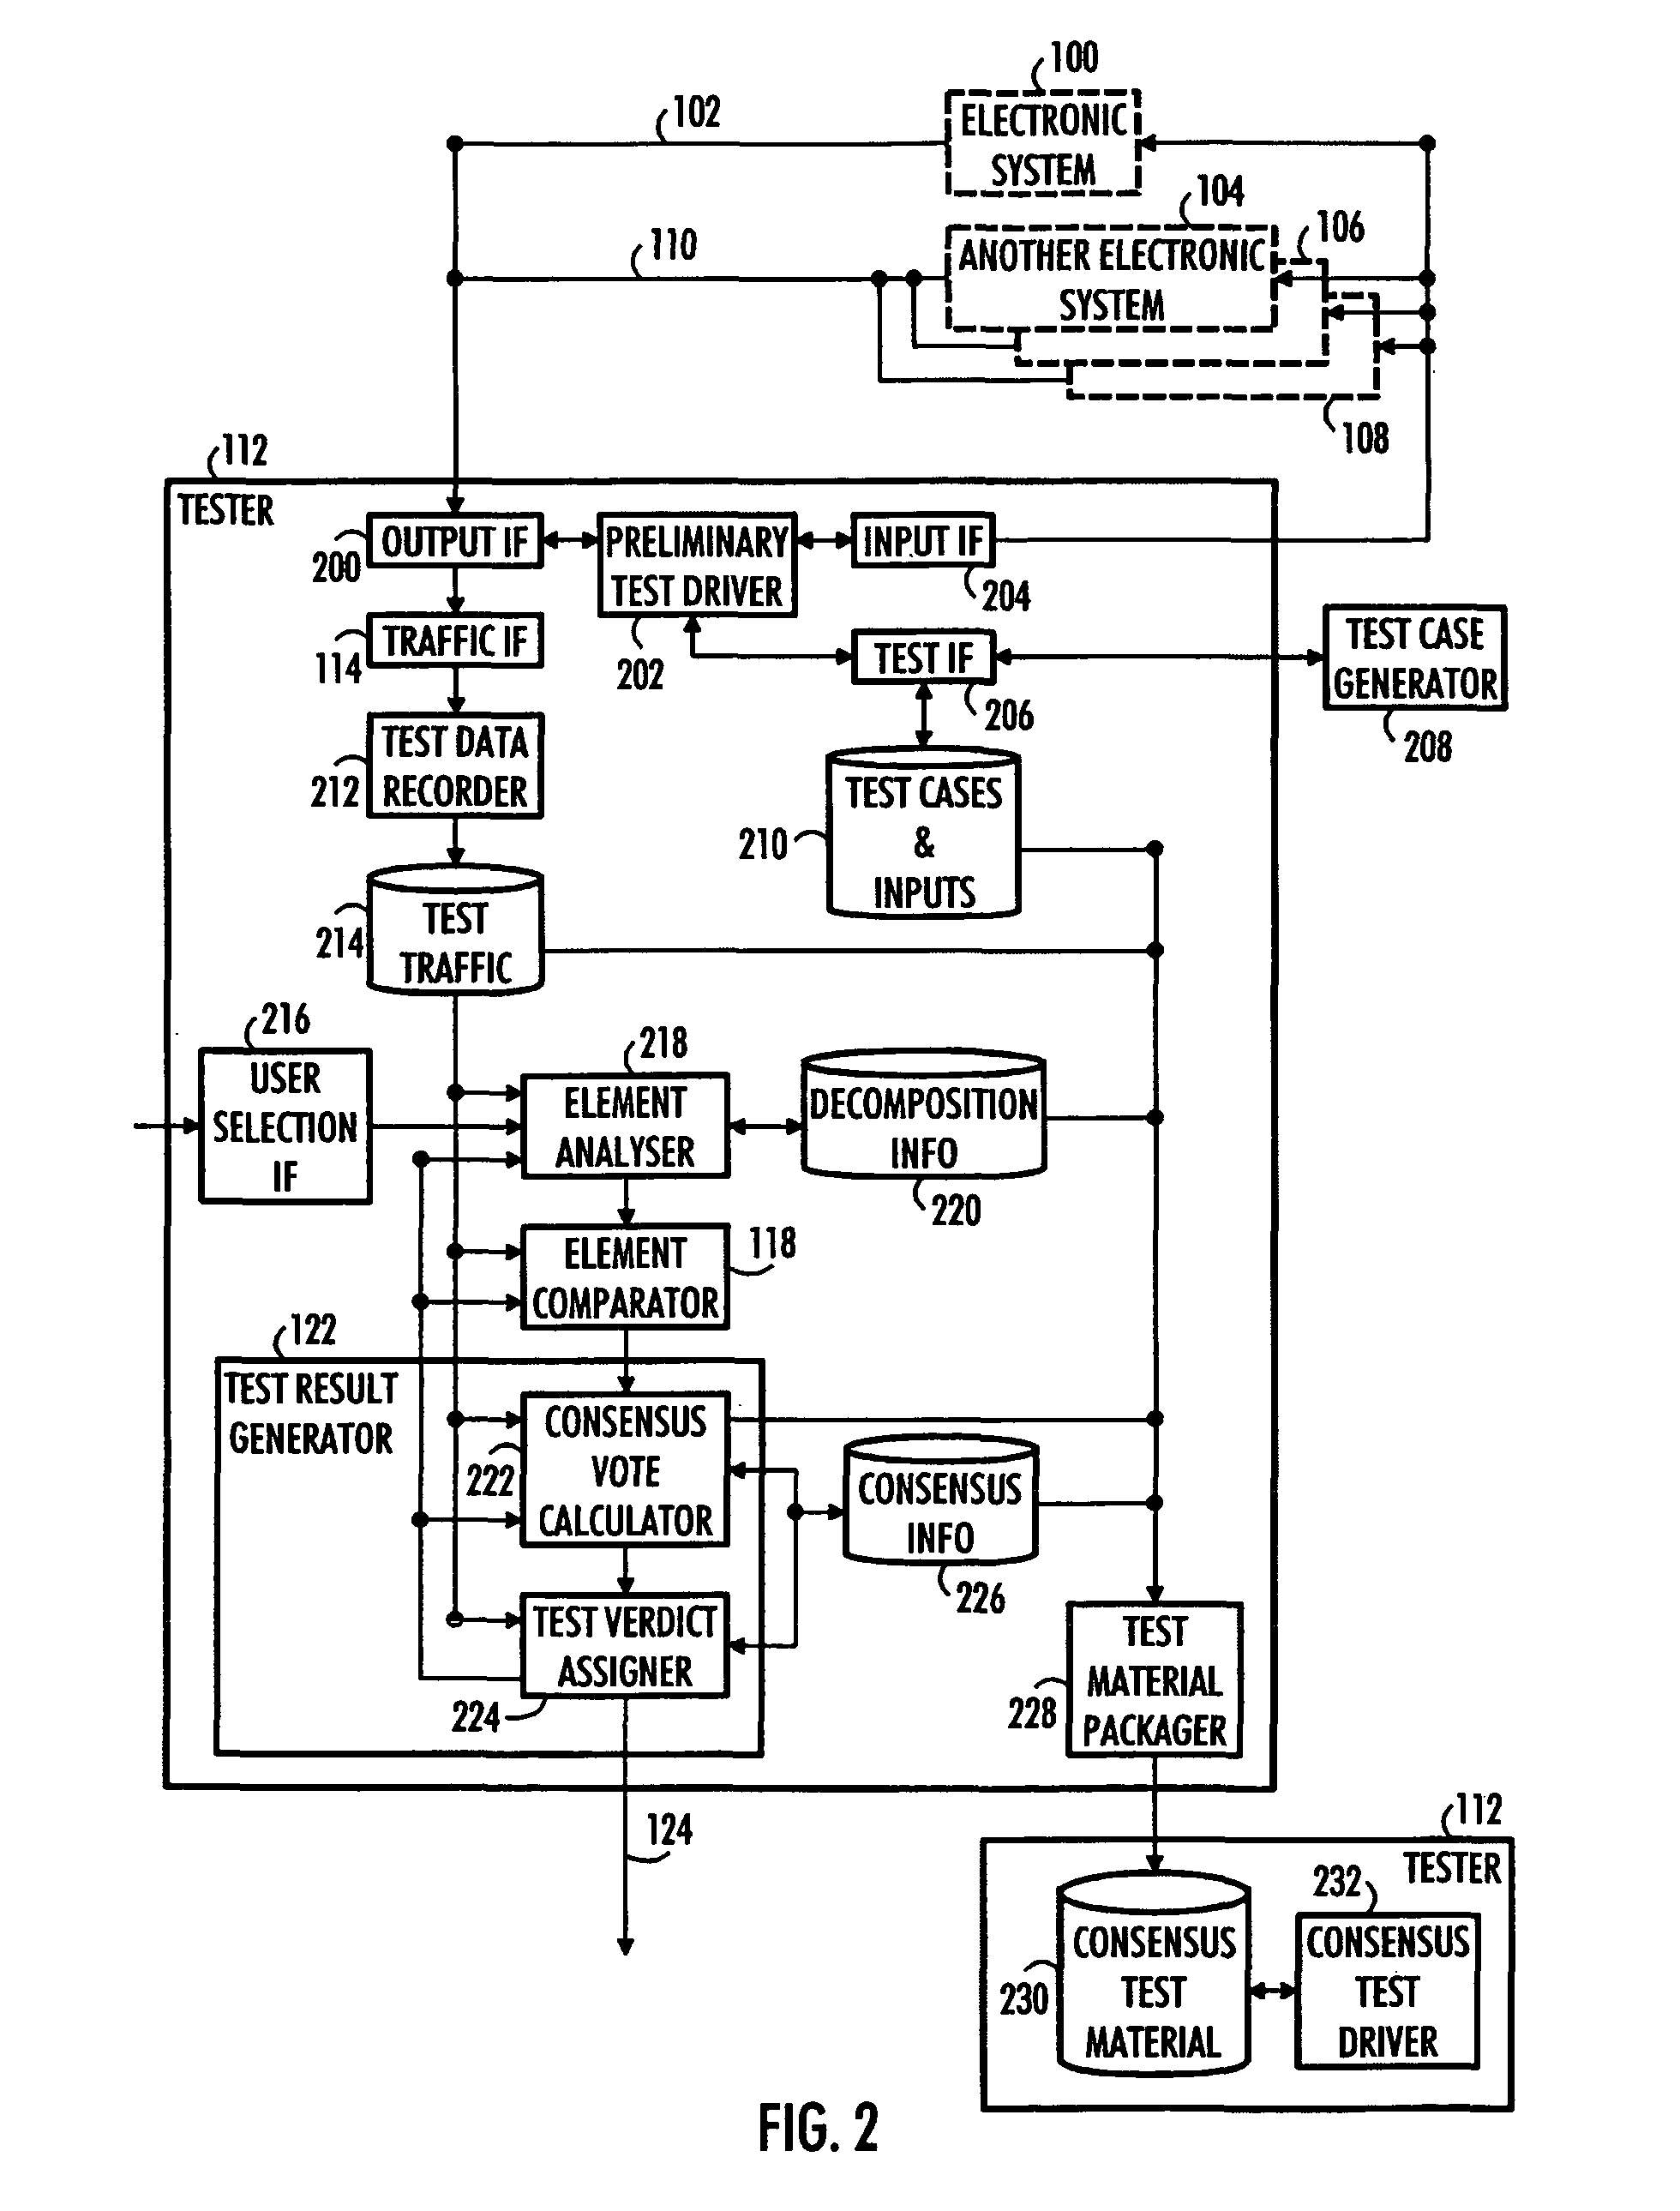 Consensus testing of electronic system